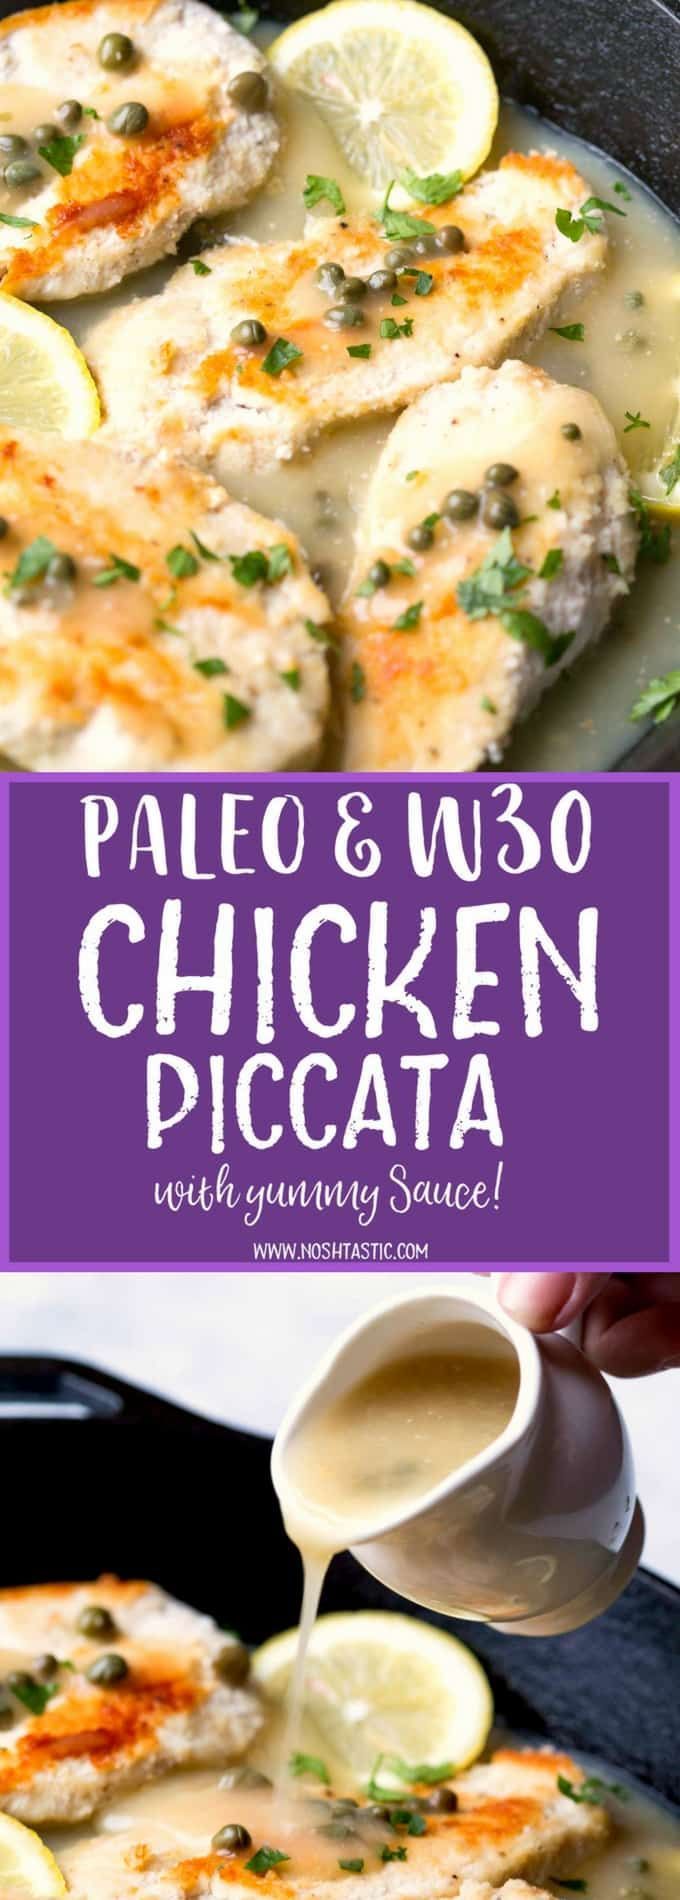 Back on Track Whole30 Meal Plan -   21 elimination diet whole 30
 ideas